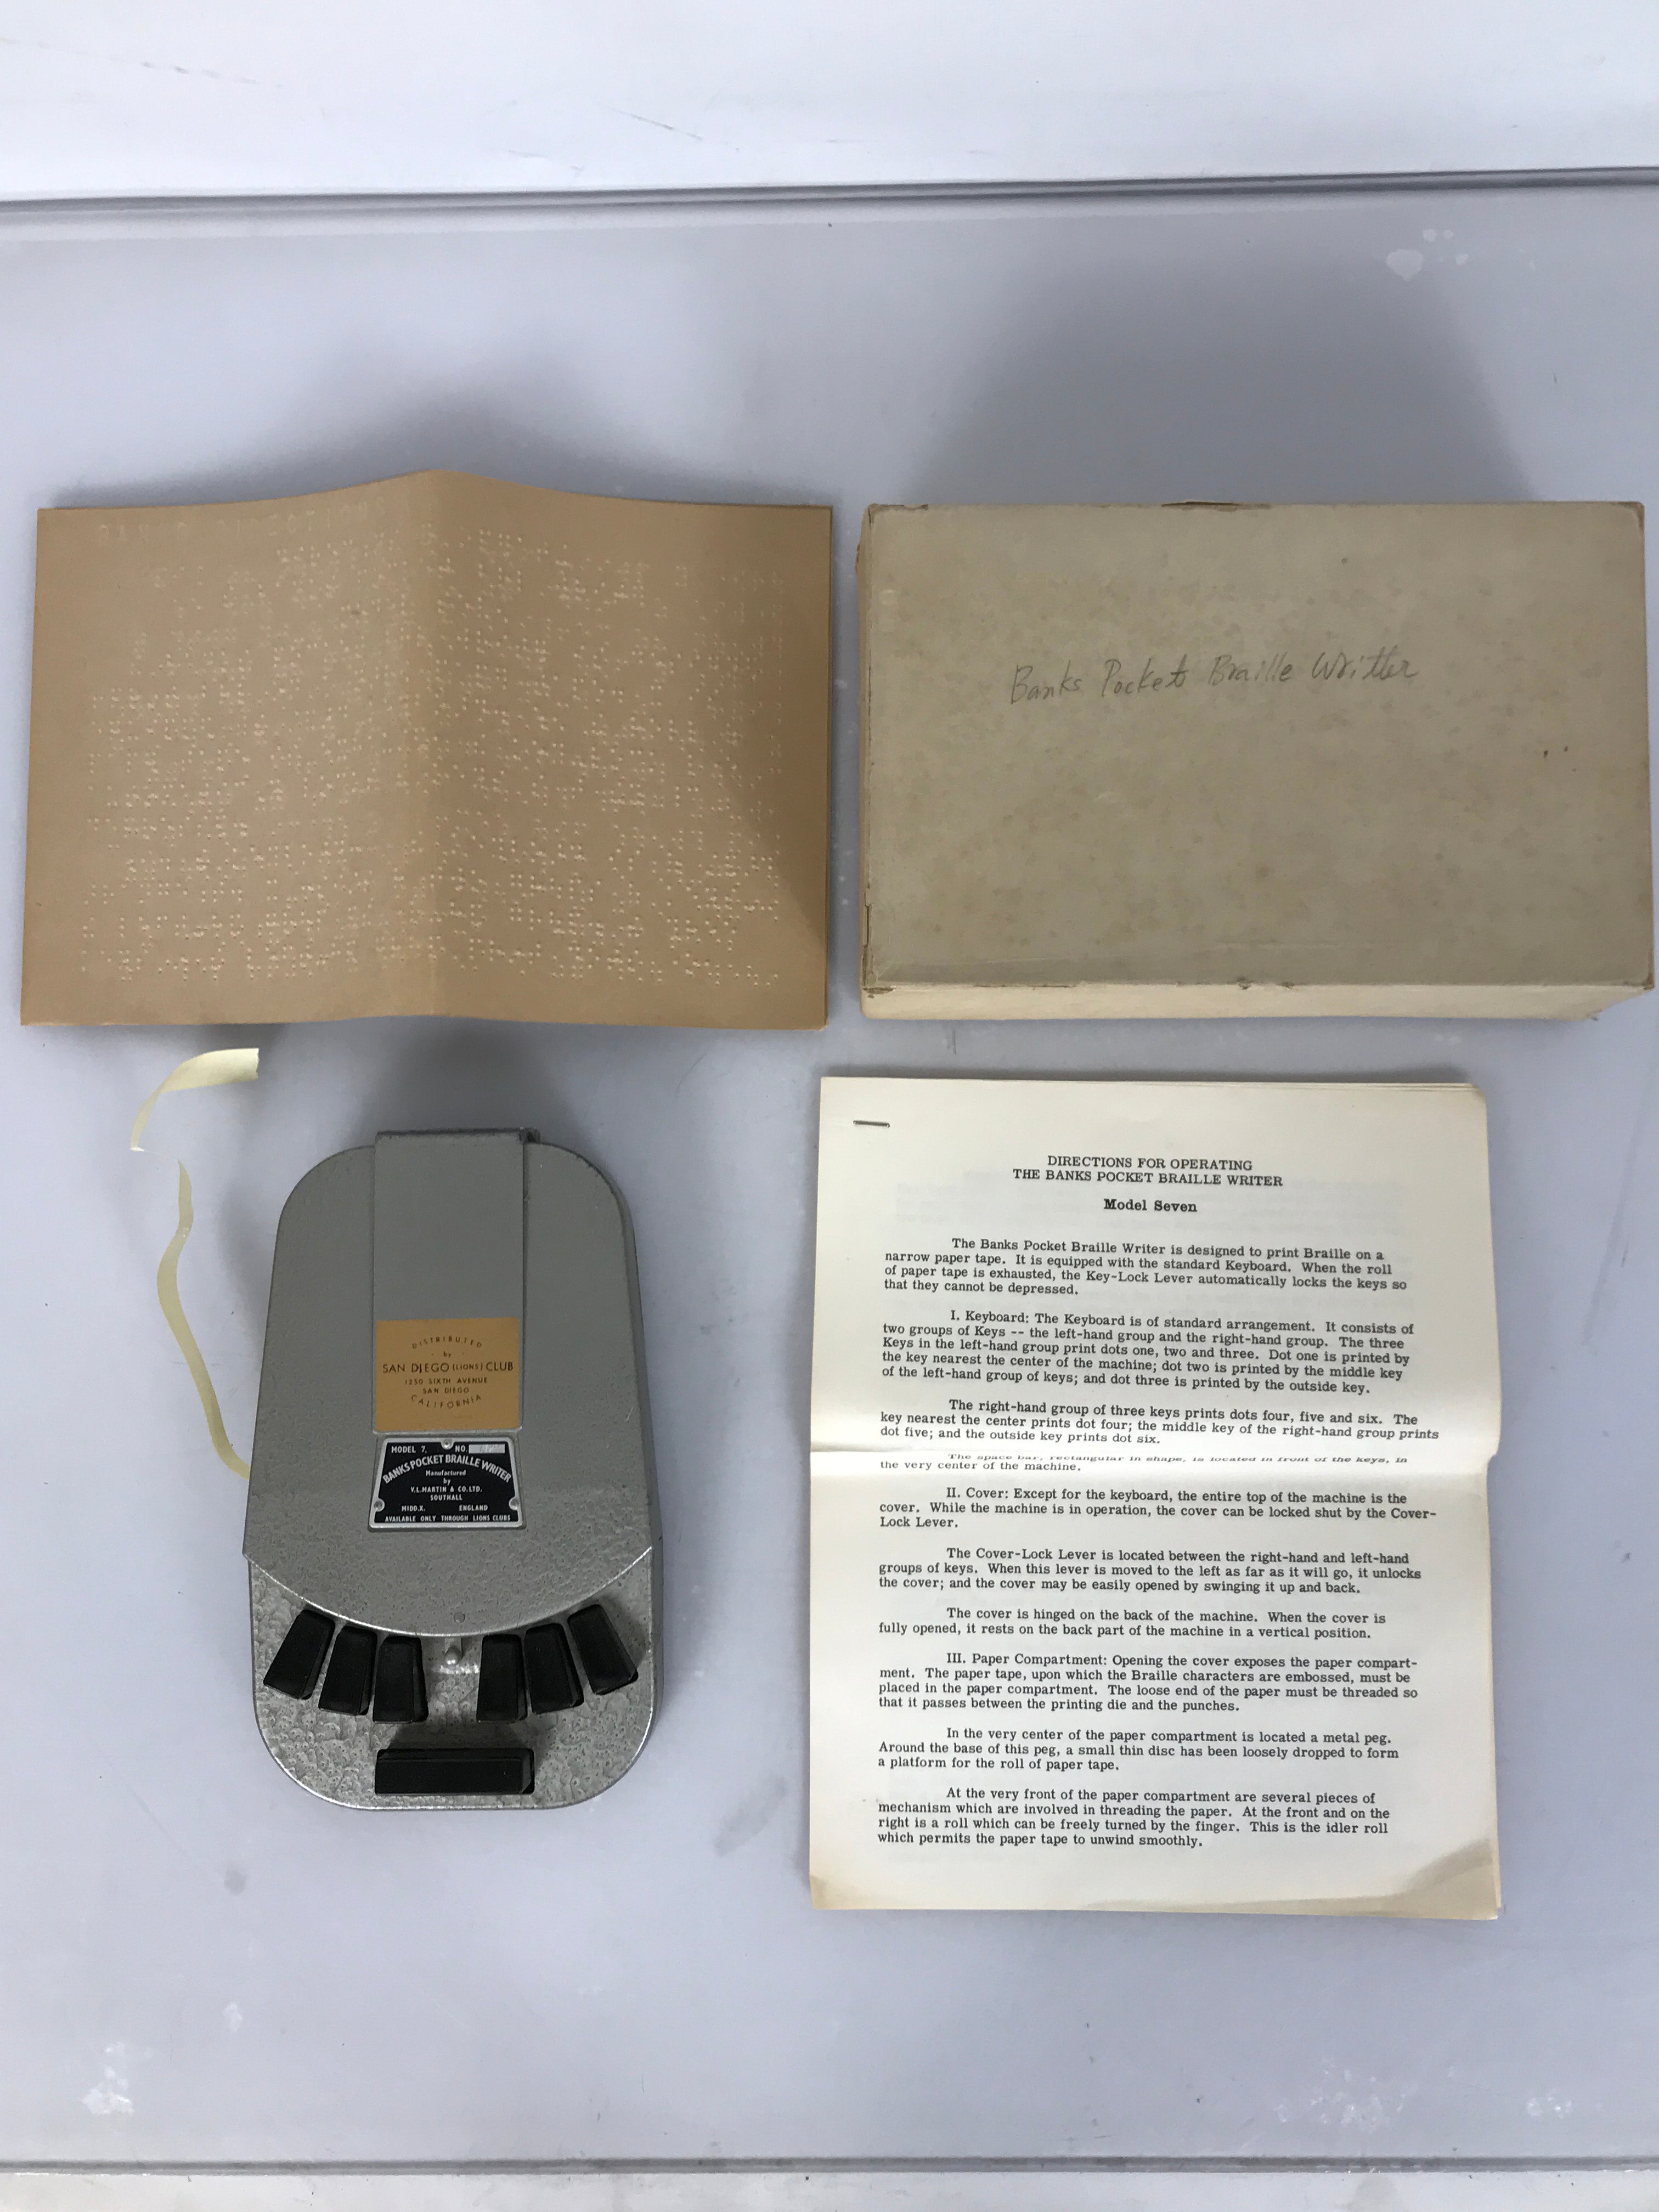 Banks Pocket Braille Writer No. 7 with Box & Instructions